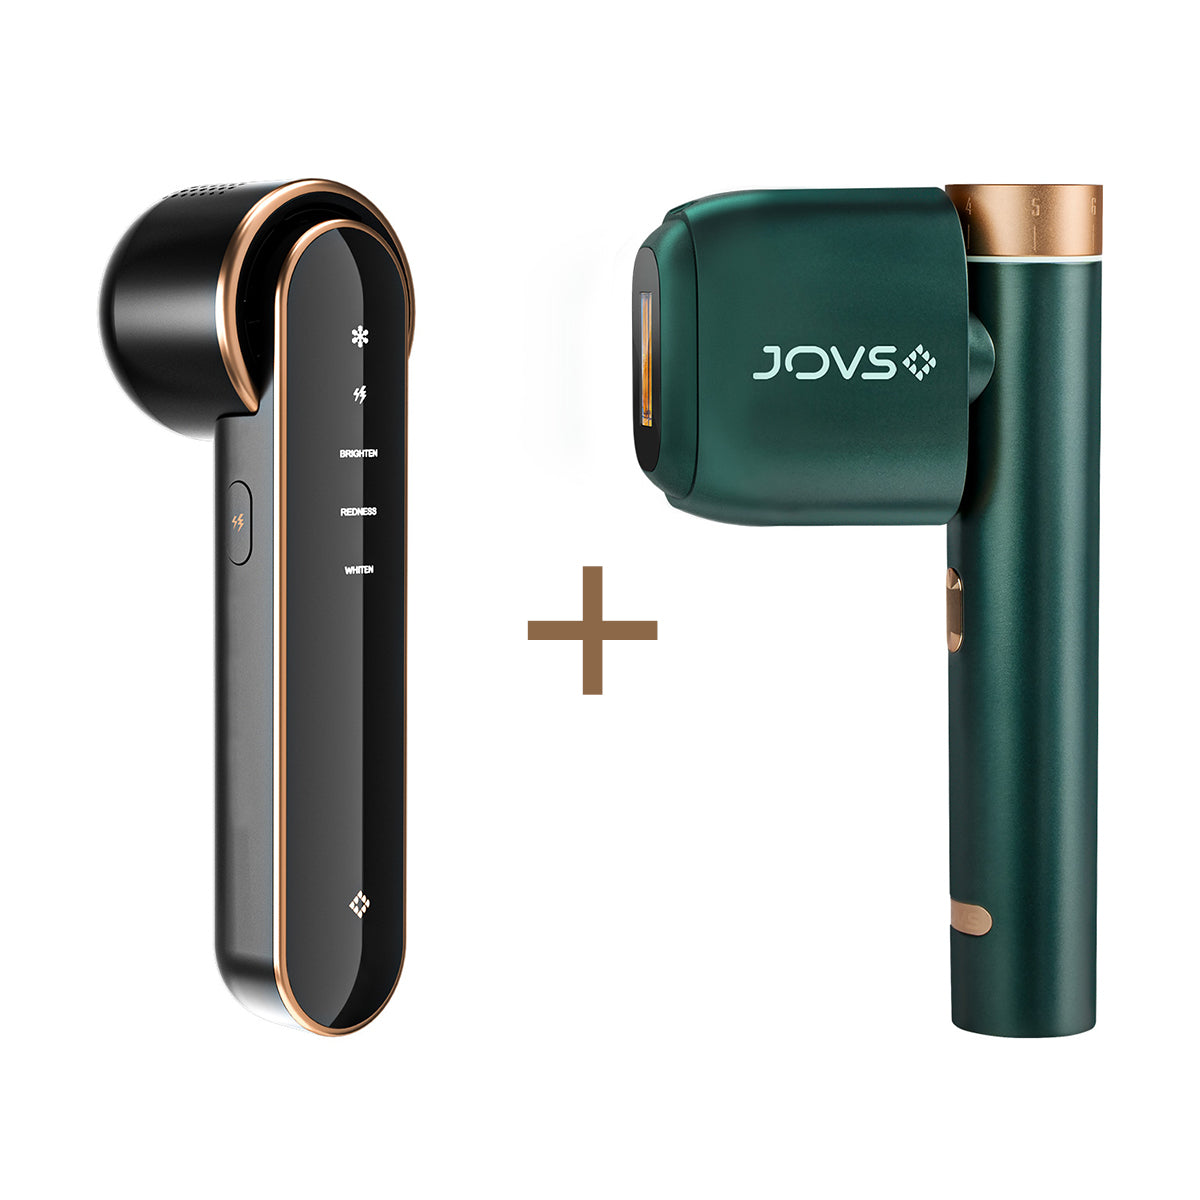 JOVS sleek black and gold Blacken DPL Photorejuvenation Skincare Device paired with a emerald and gold Venus Pro™ II IPL Hair Removal Device, showcasing advanced beauty technology.